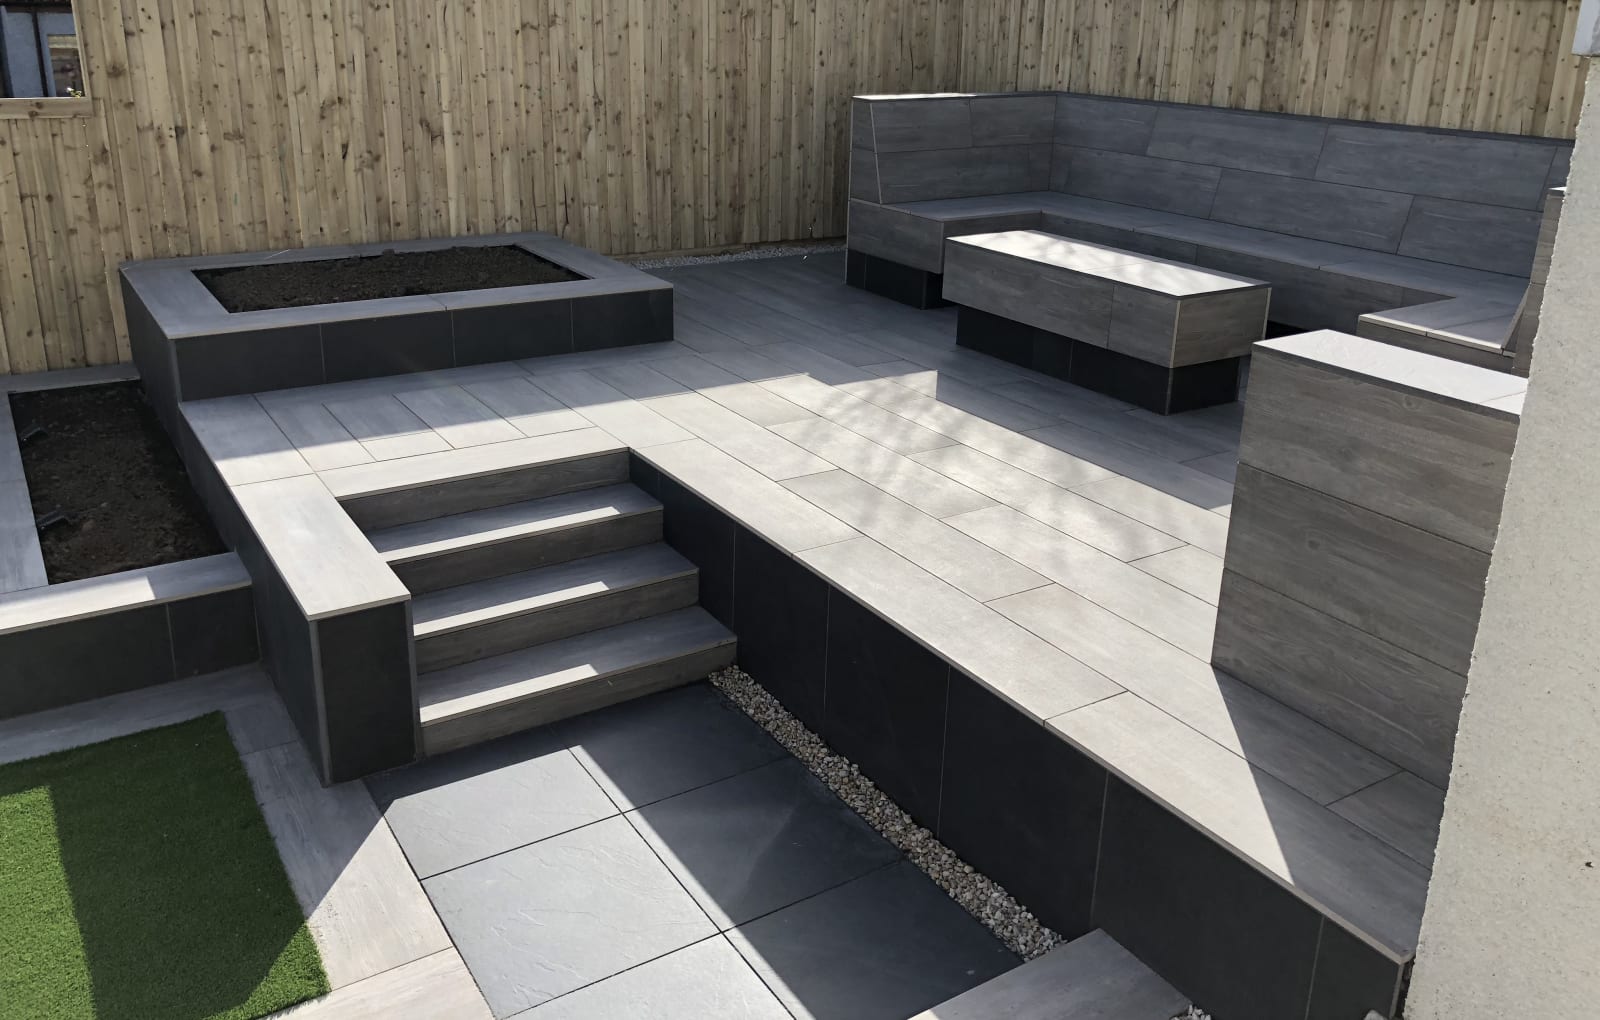 Symphony porcelain paving with bespoke seating area